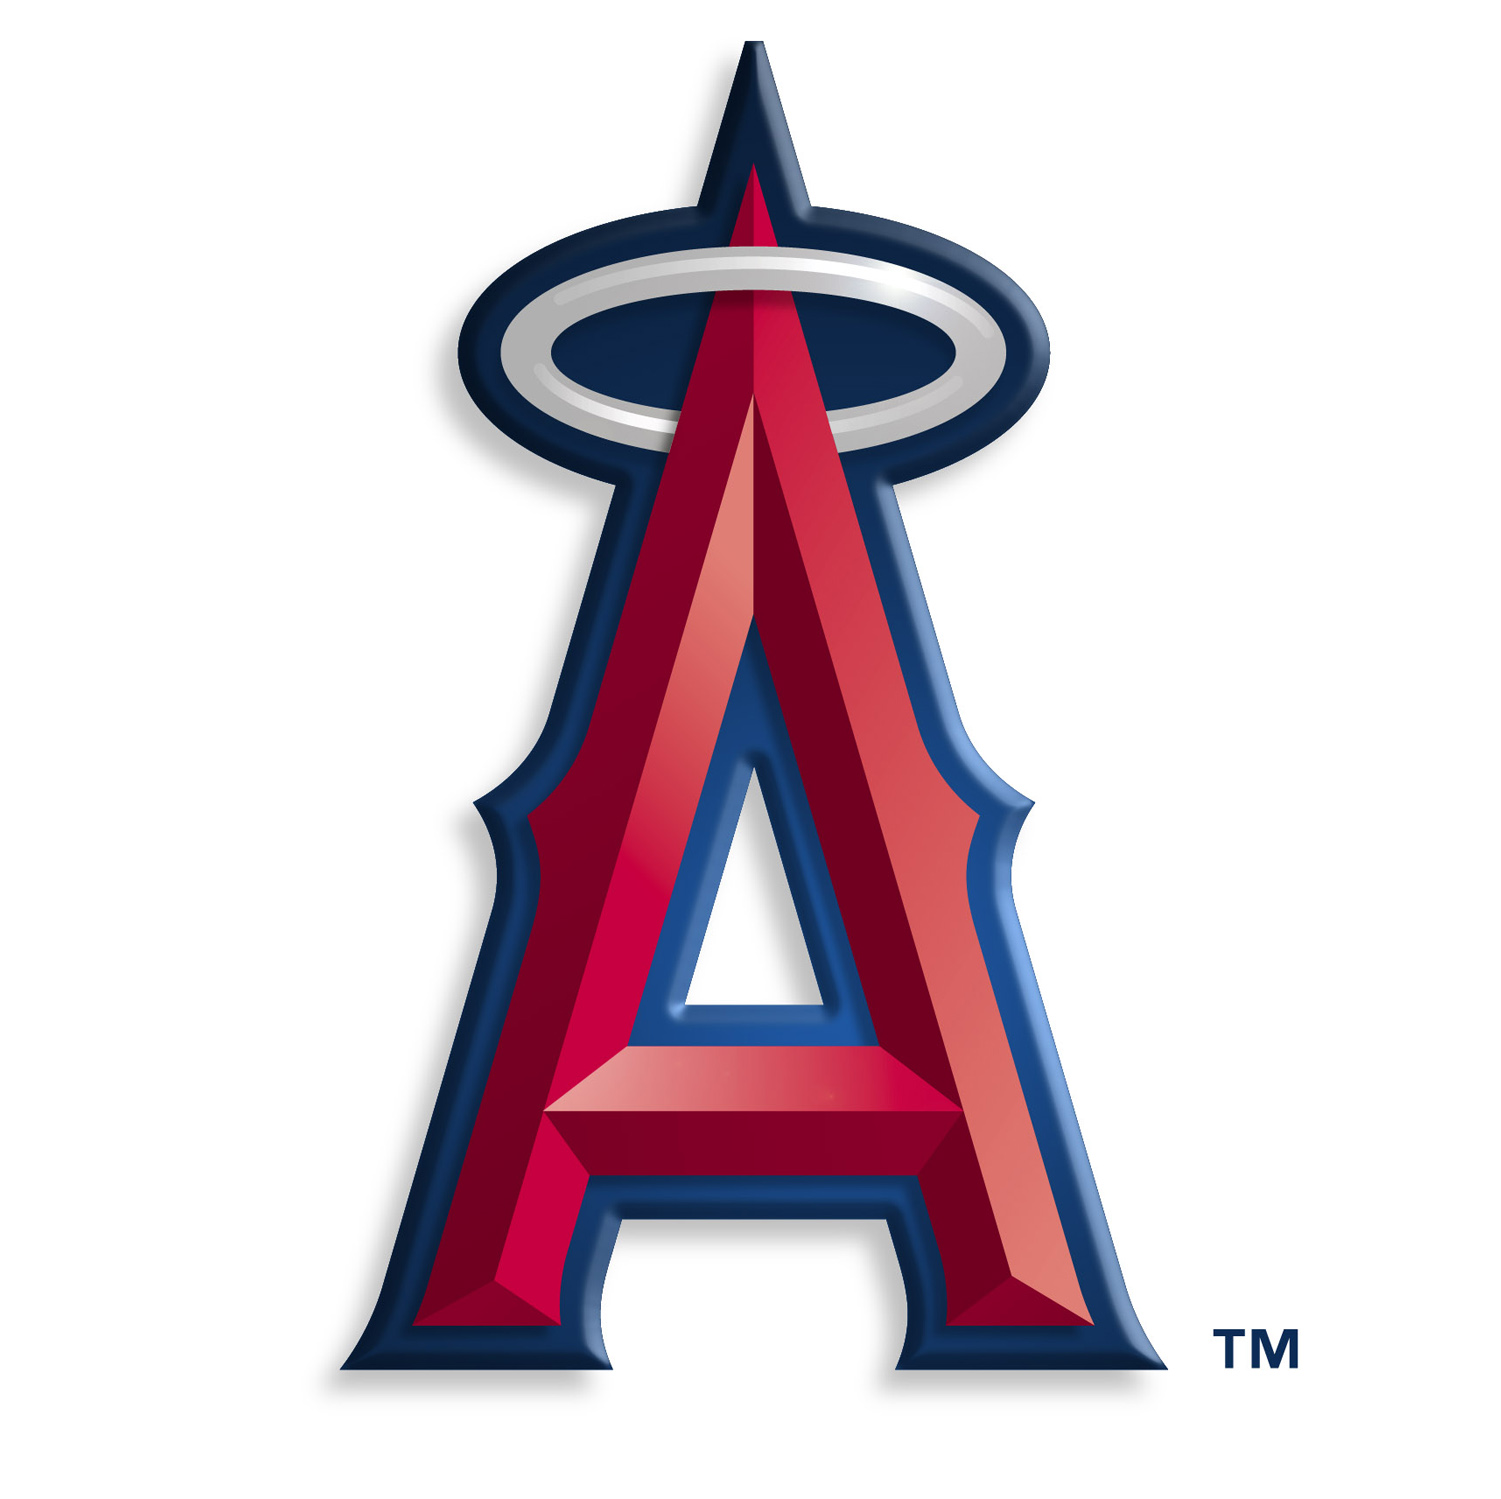 Discover Orange County™ with Lisa Hart takes viewers on a behind-the-scenes tour of The Angel Stadium of Anaheim, home of the 2014 AL West Division Champions, The Los Angeles Angels of Anaheim